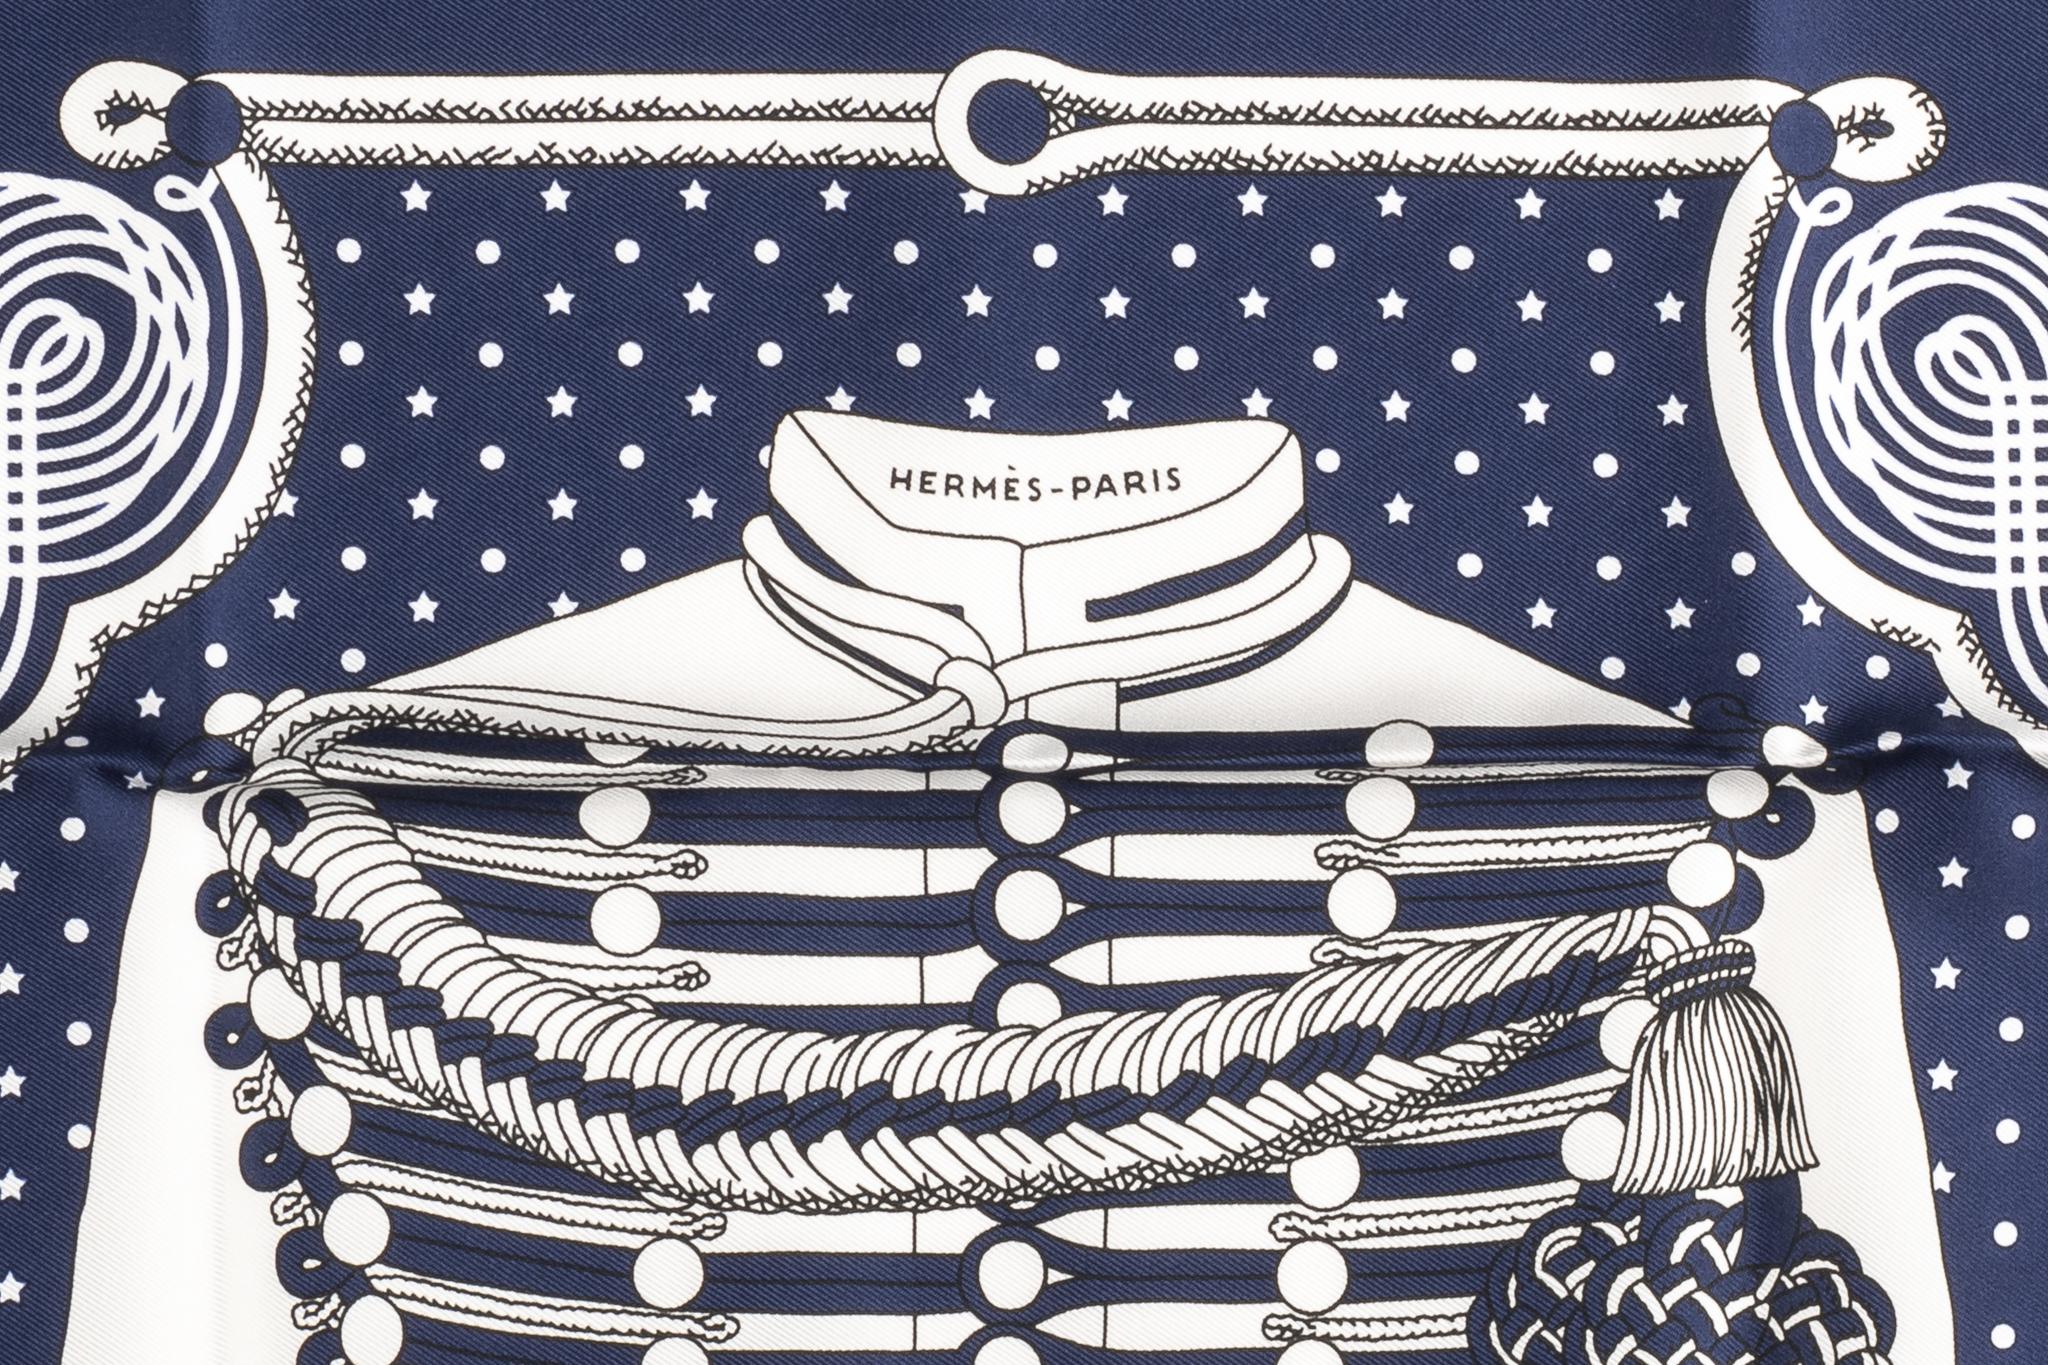 Hermes blue and white limited edition Brandebourg bandana silk scarf. 55 cm. Brand new in box.